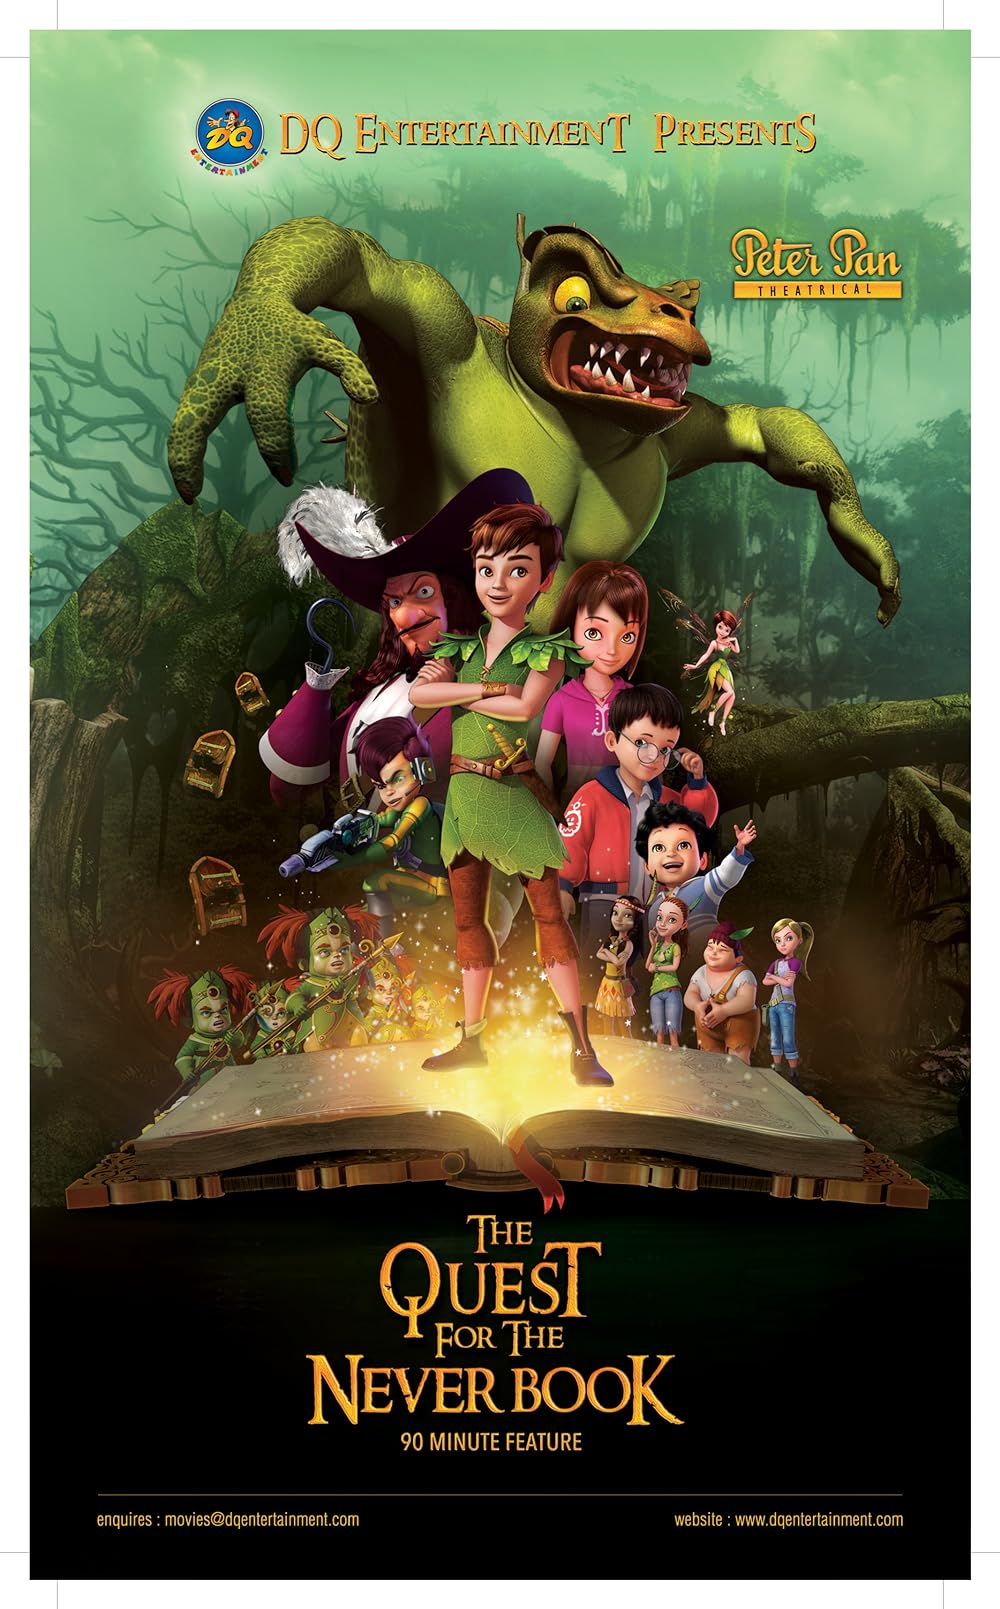 Peter Pan: The Quest for the Neverbook (2018)